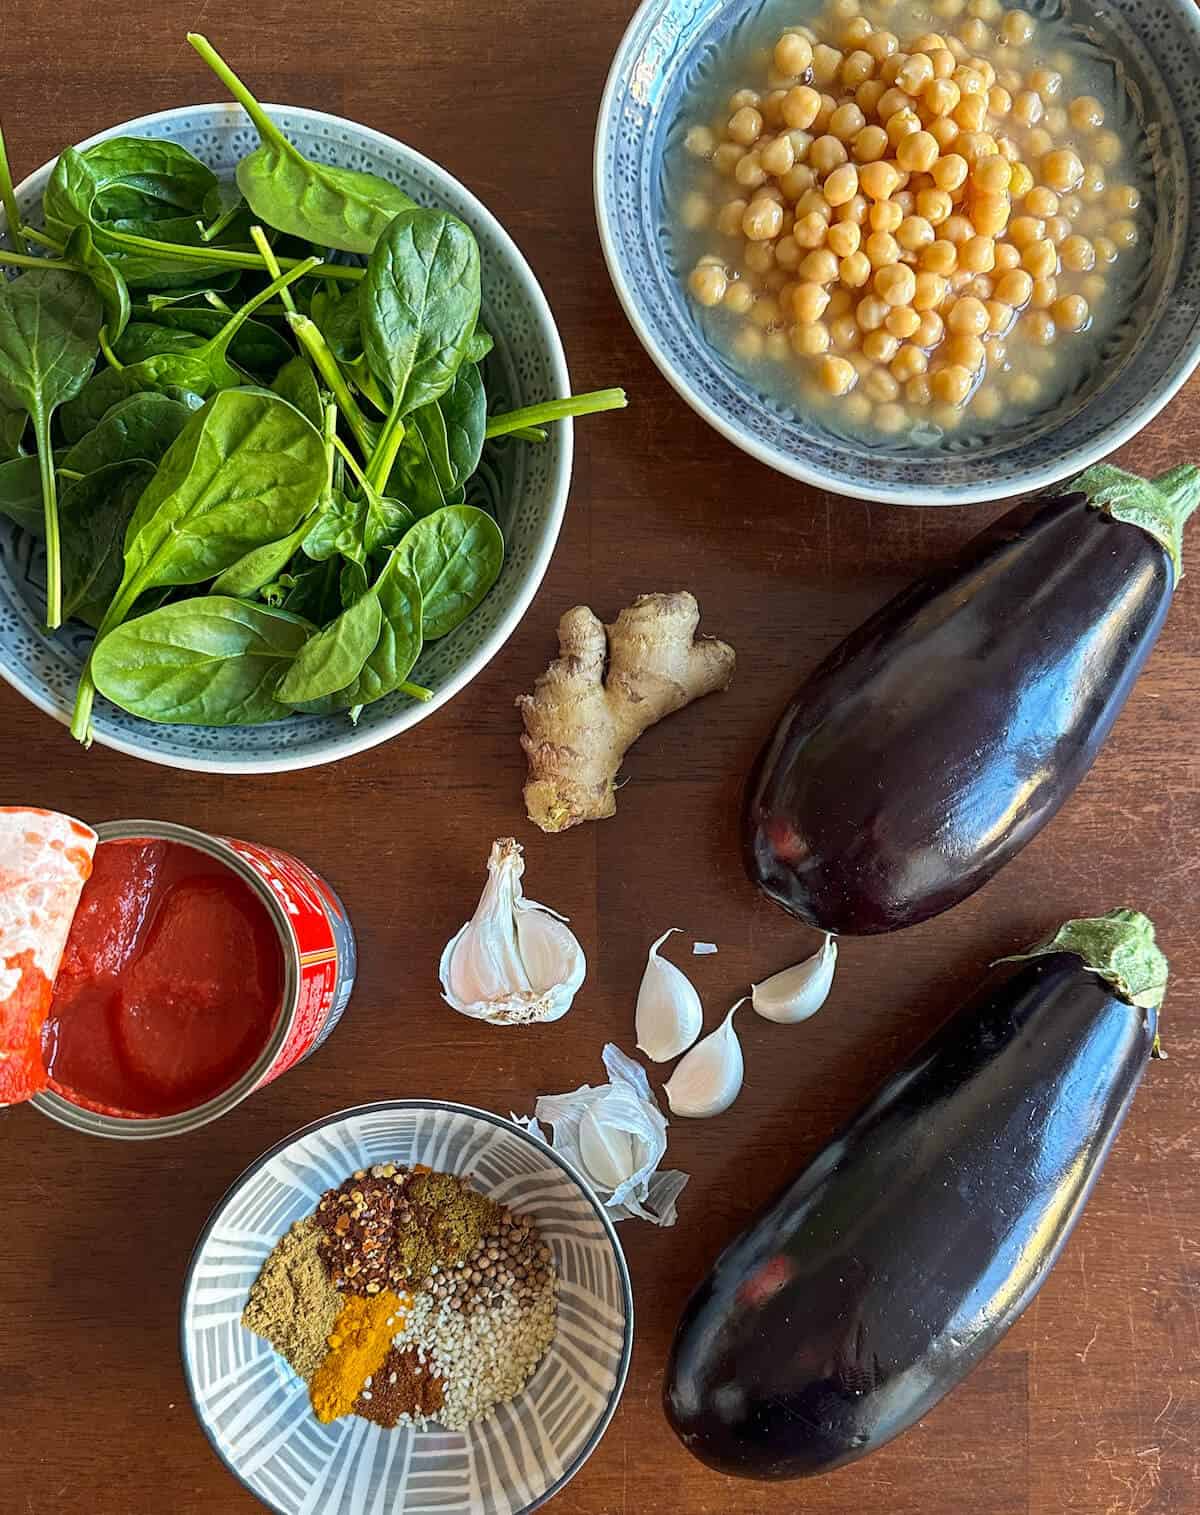 Ingredients for eggplant masala: aubergine or eggplant, chickpeas, tinned tomatoes, garlic, ginger, spinach and a spice mix made from garam masala, cumin, fennel seeds, coriander seeds, cumin, turmeric, cayenne pepper and chilli flakes. 